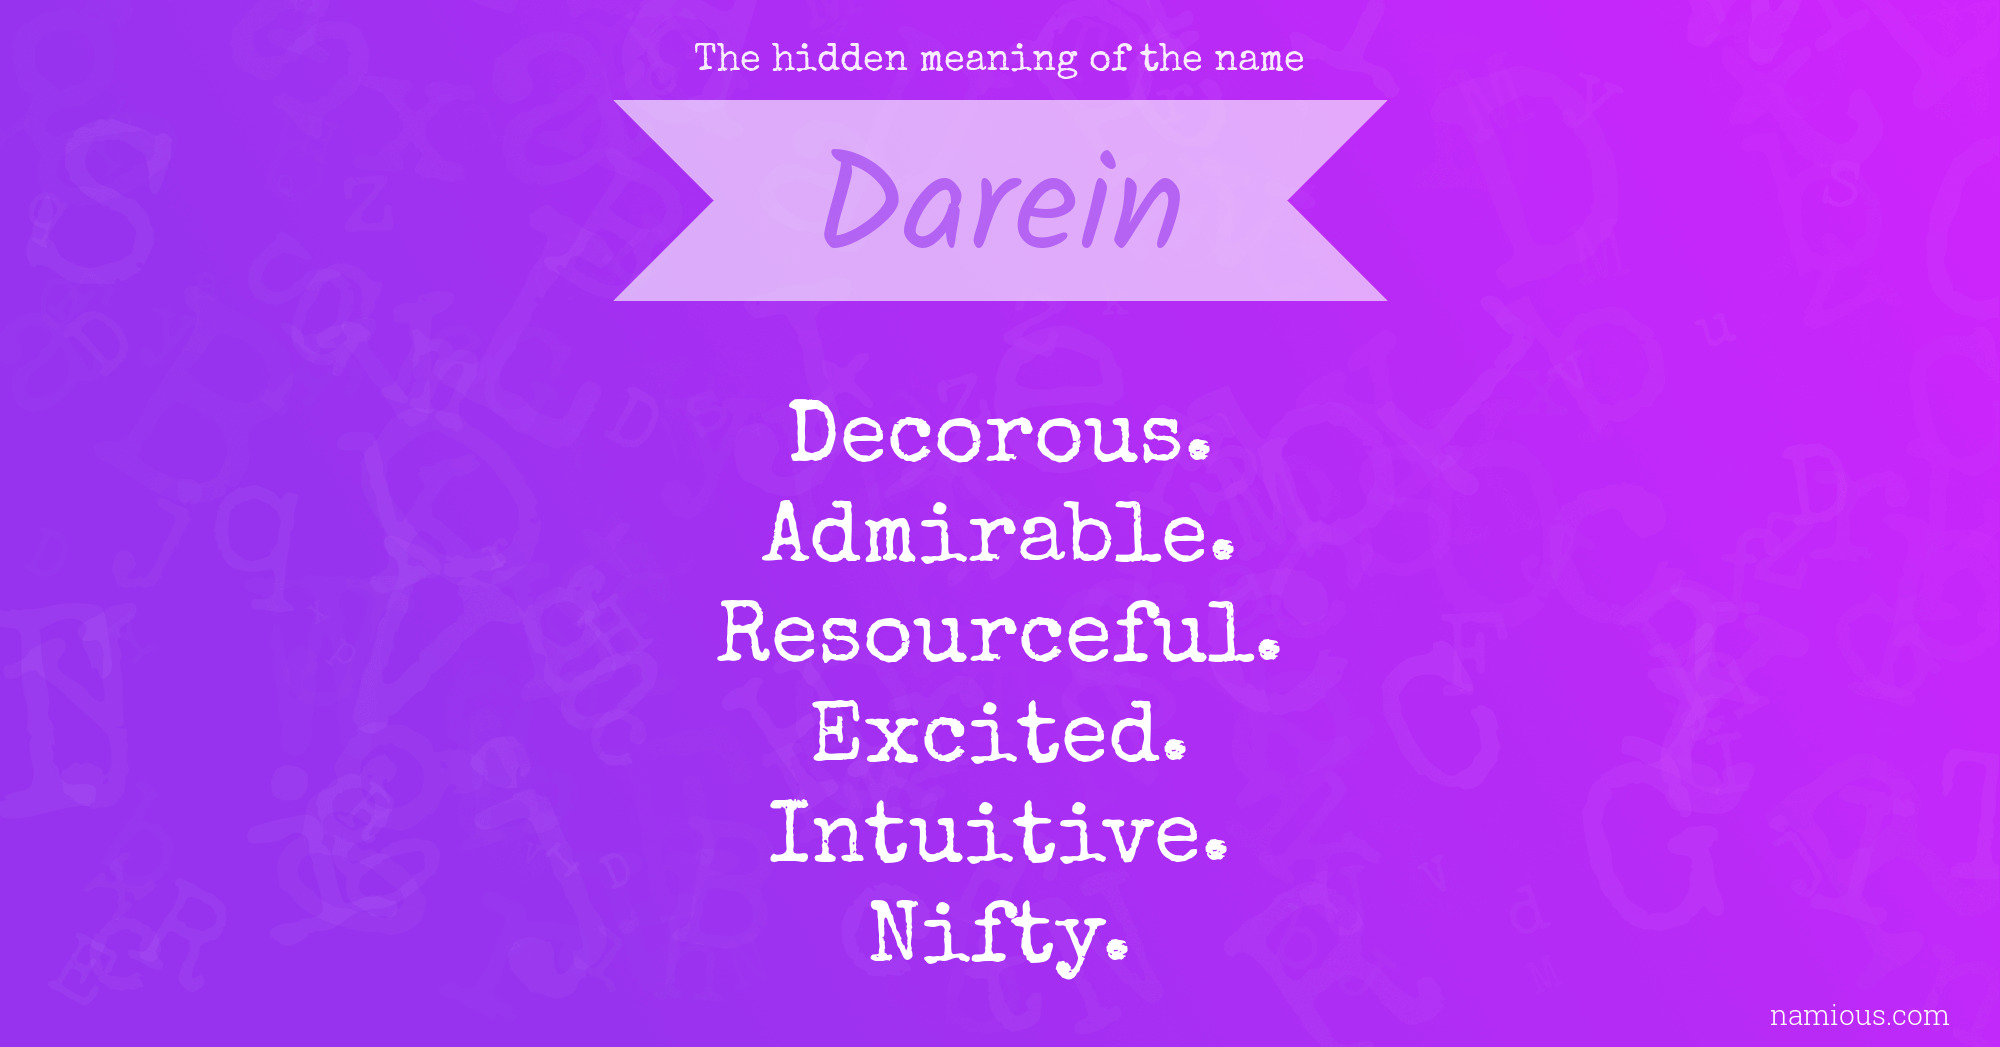 The hidden meaning of the name Darein